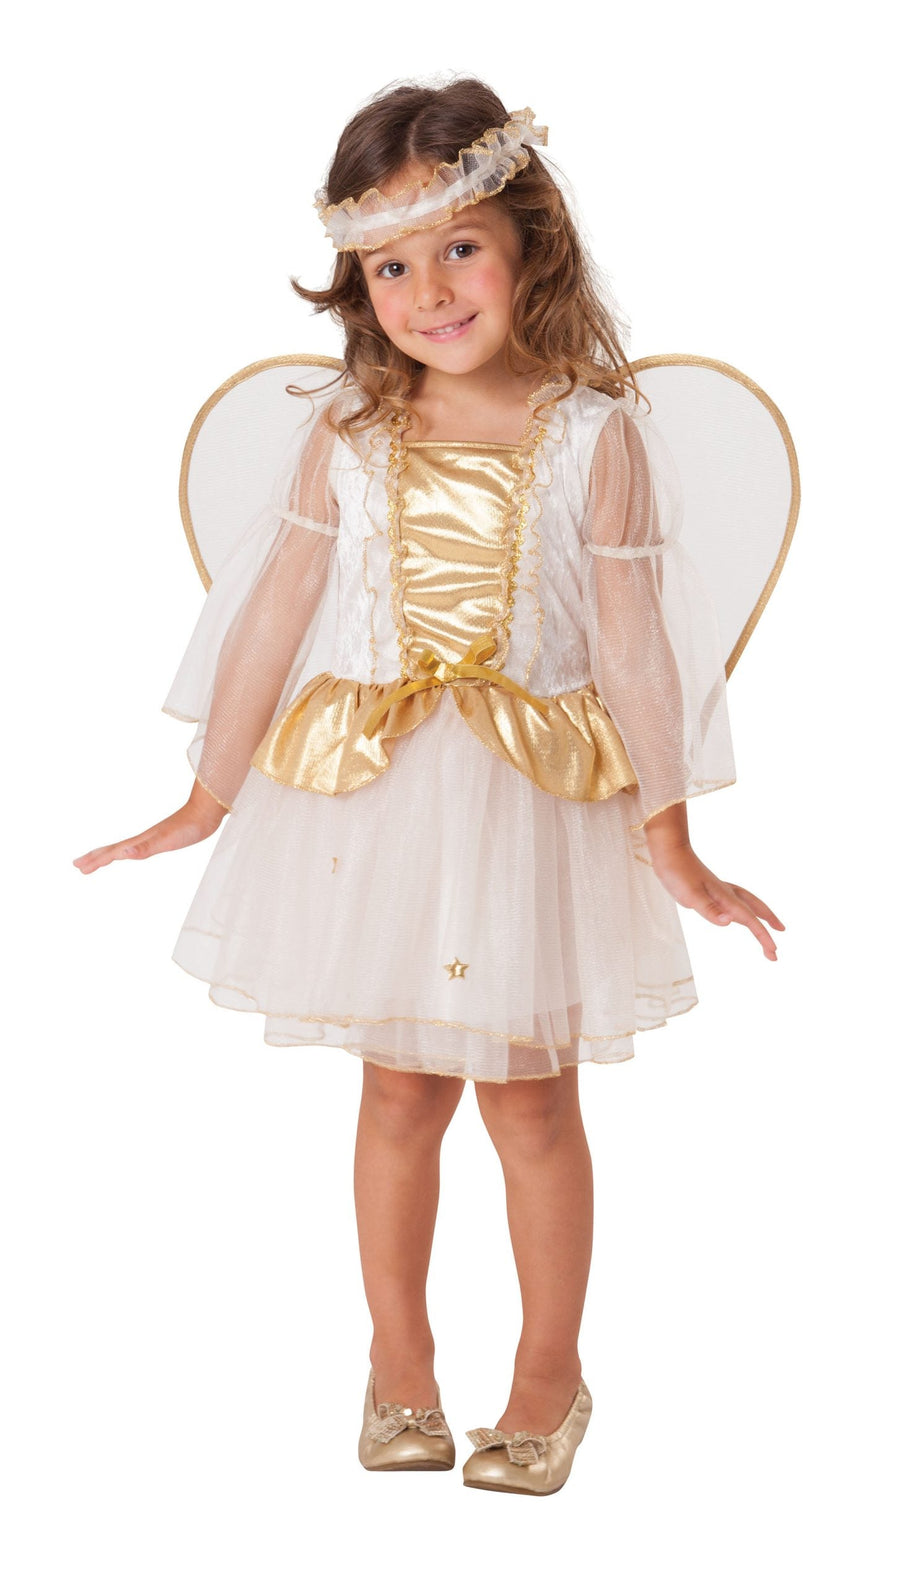 Angel Toddler Childrens Costume Female To Fit Child Of Height 90cm 100cm_1